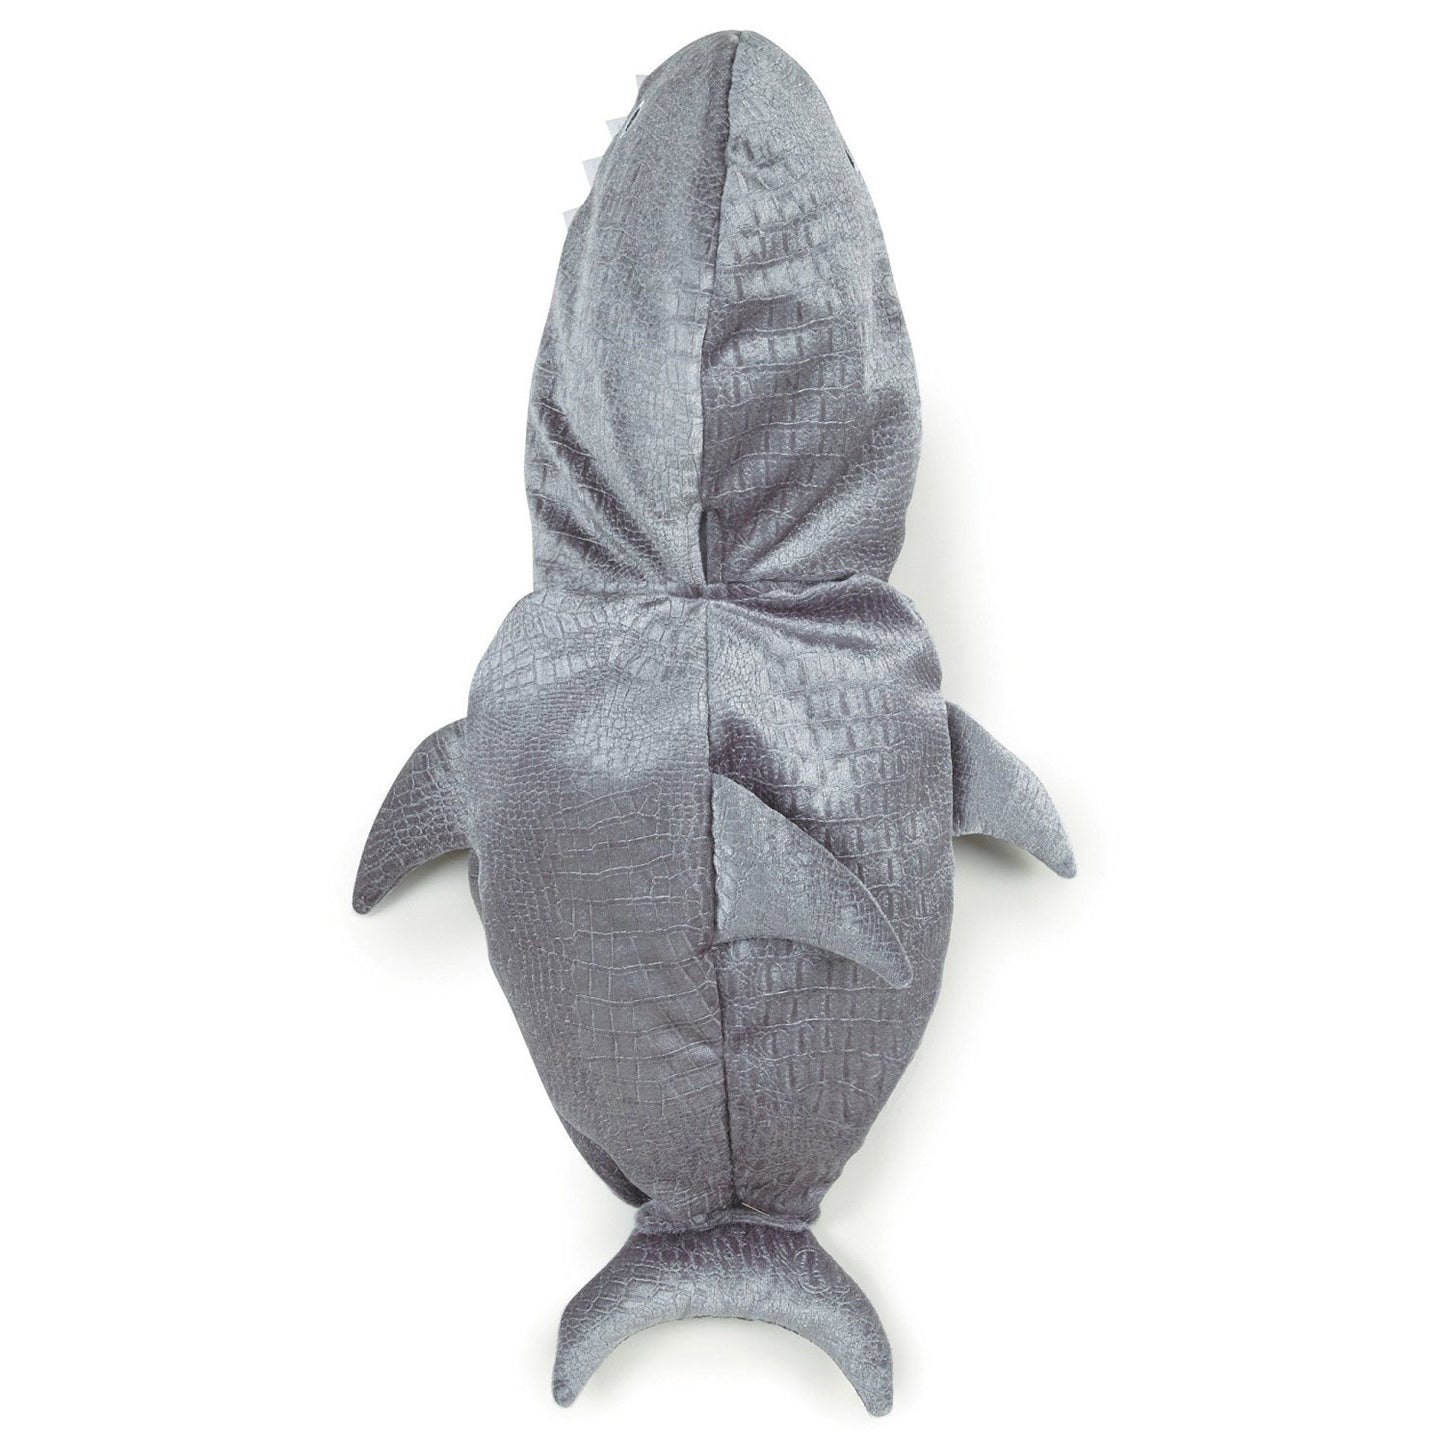 Casual Canine Casual Canine Shark Costume for Dogs, 16" Medium